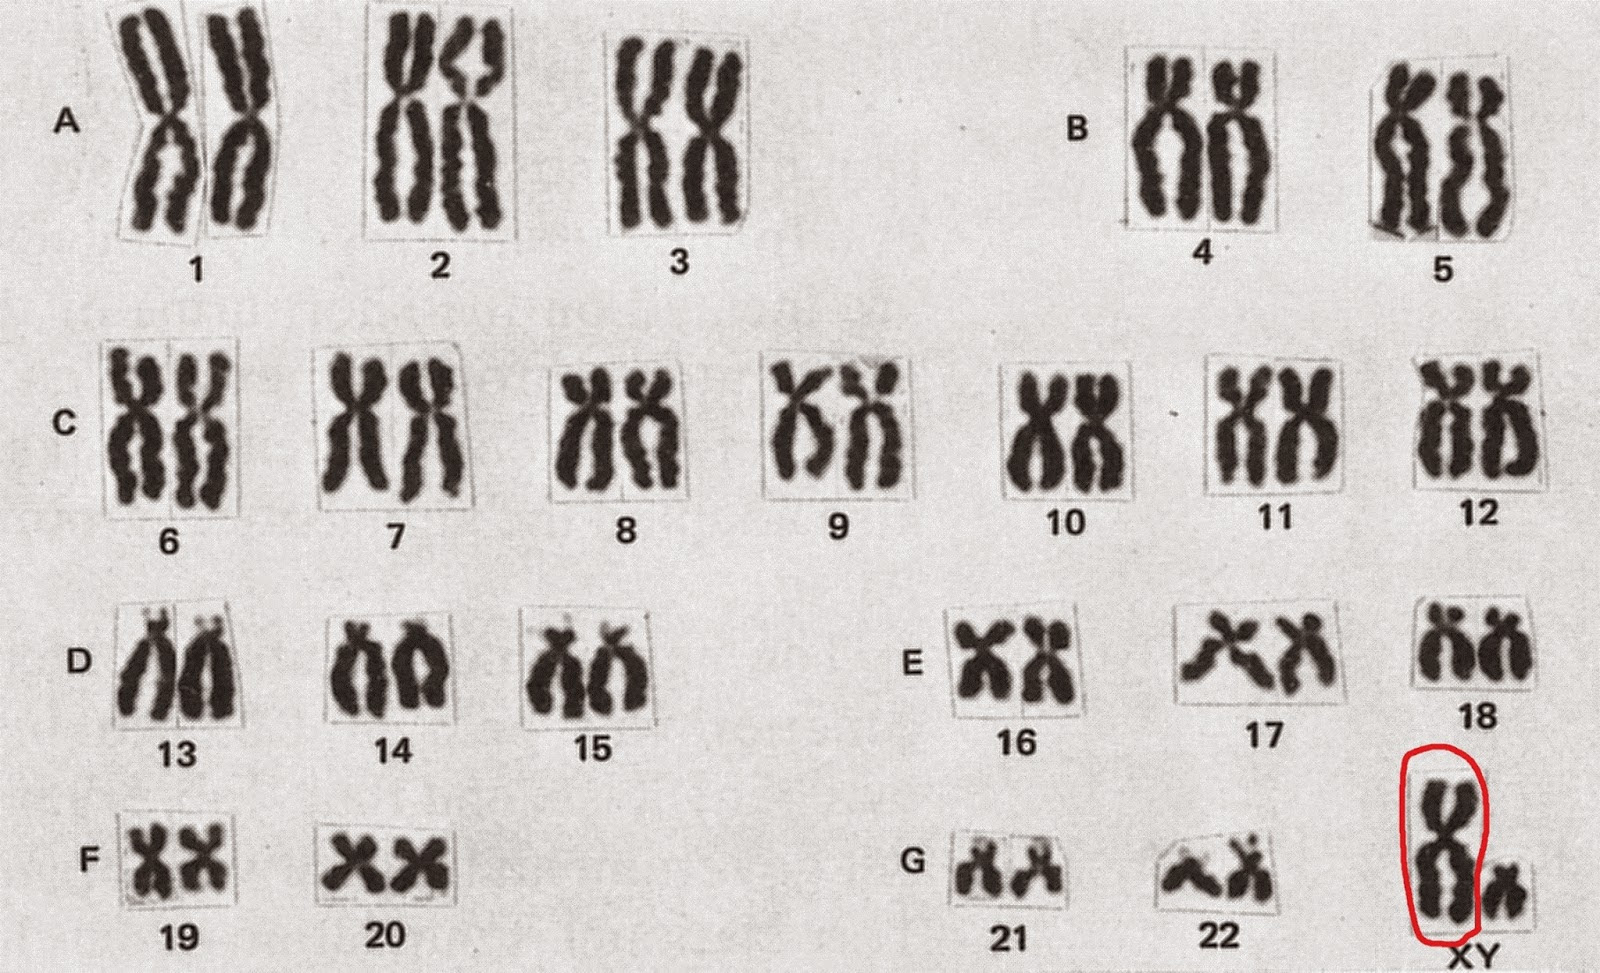 Bombshell Evidence that COVID RNA Base Pairs are Identical to Chromosome 8 Human DNA 0EmViwFQmT